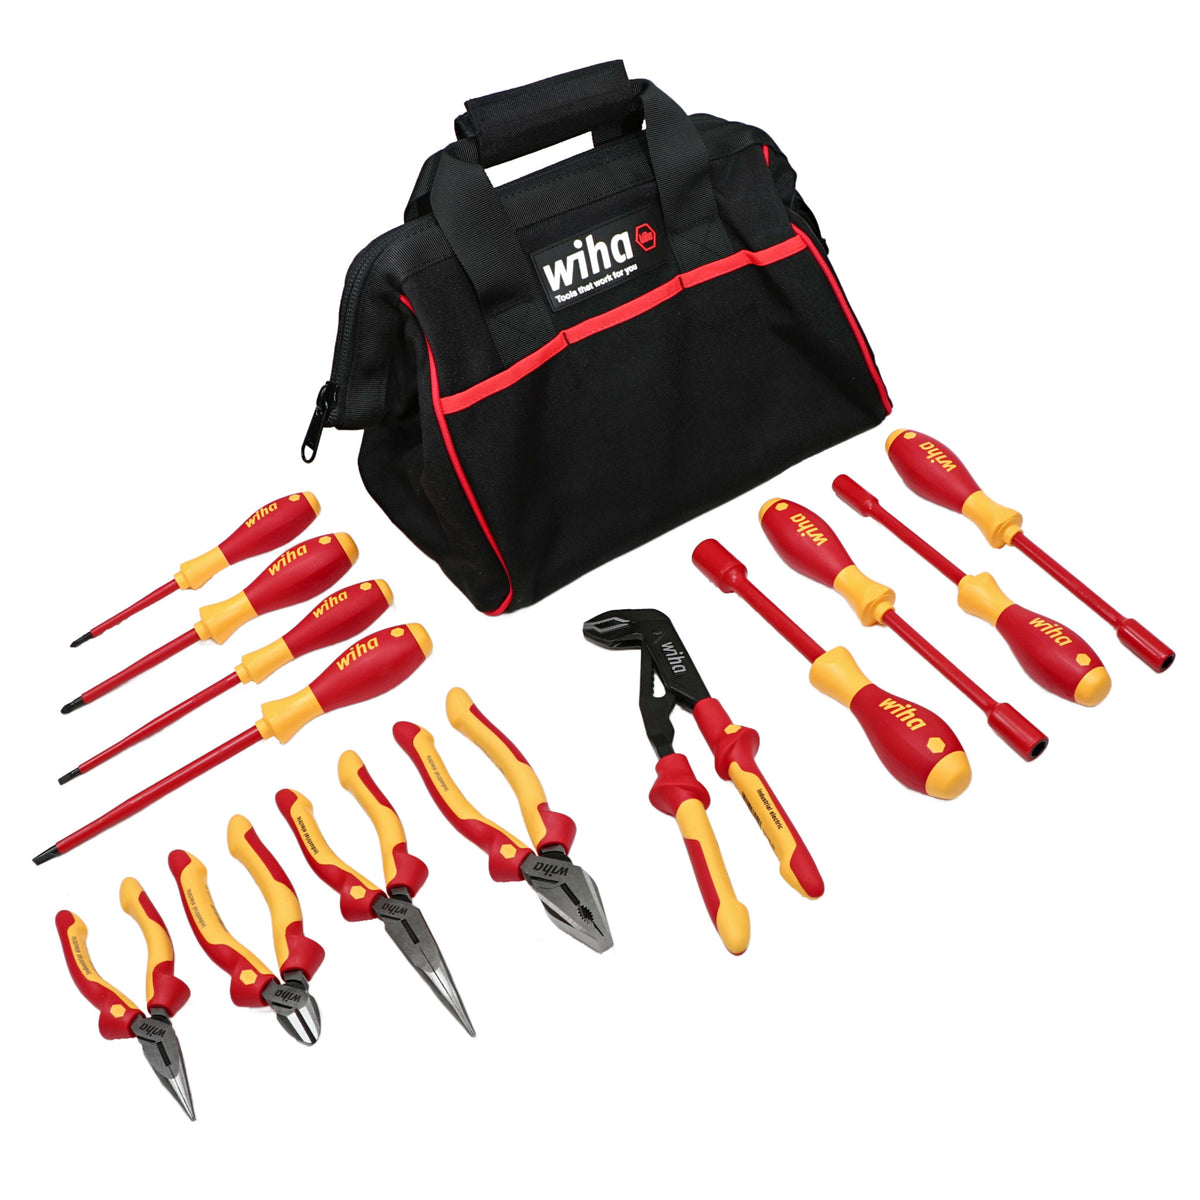 Wiha 32894 13 Piece Master Electrician's Insulated Tool Set in Canvas Tool Bag